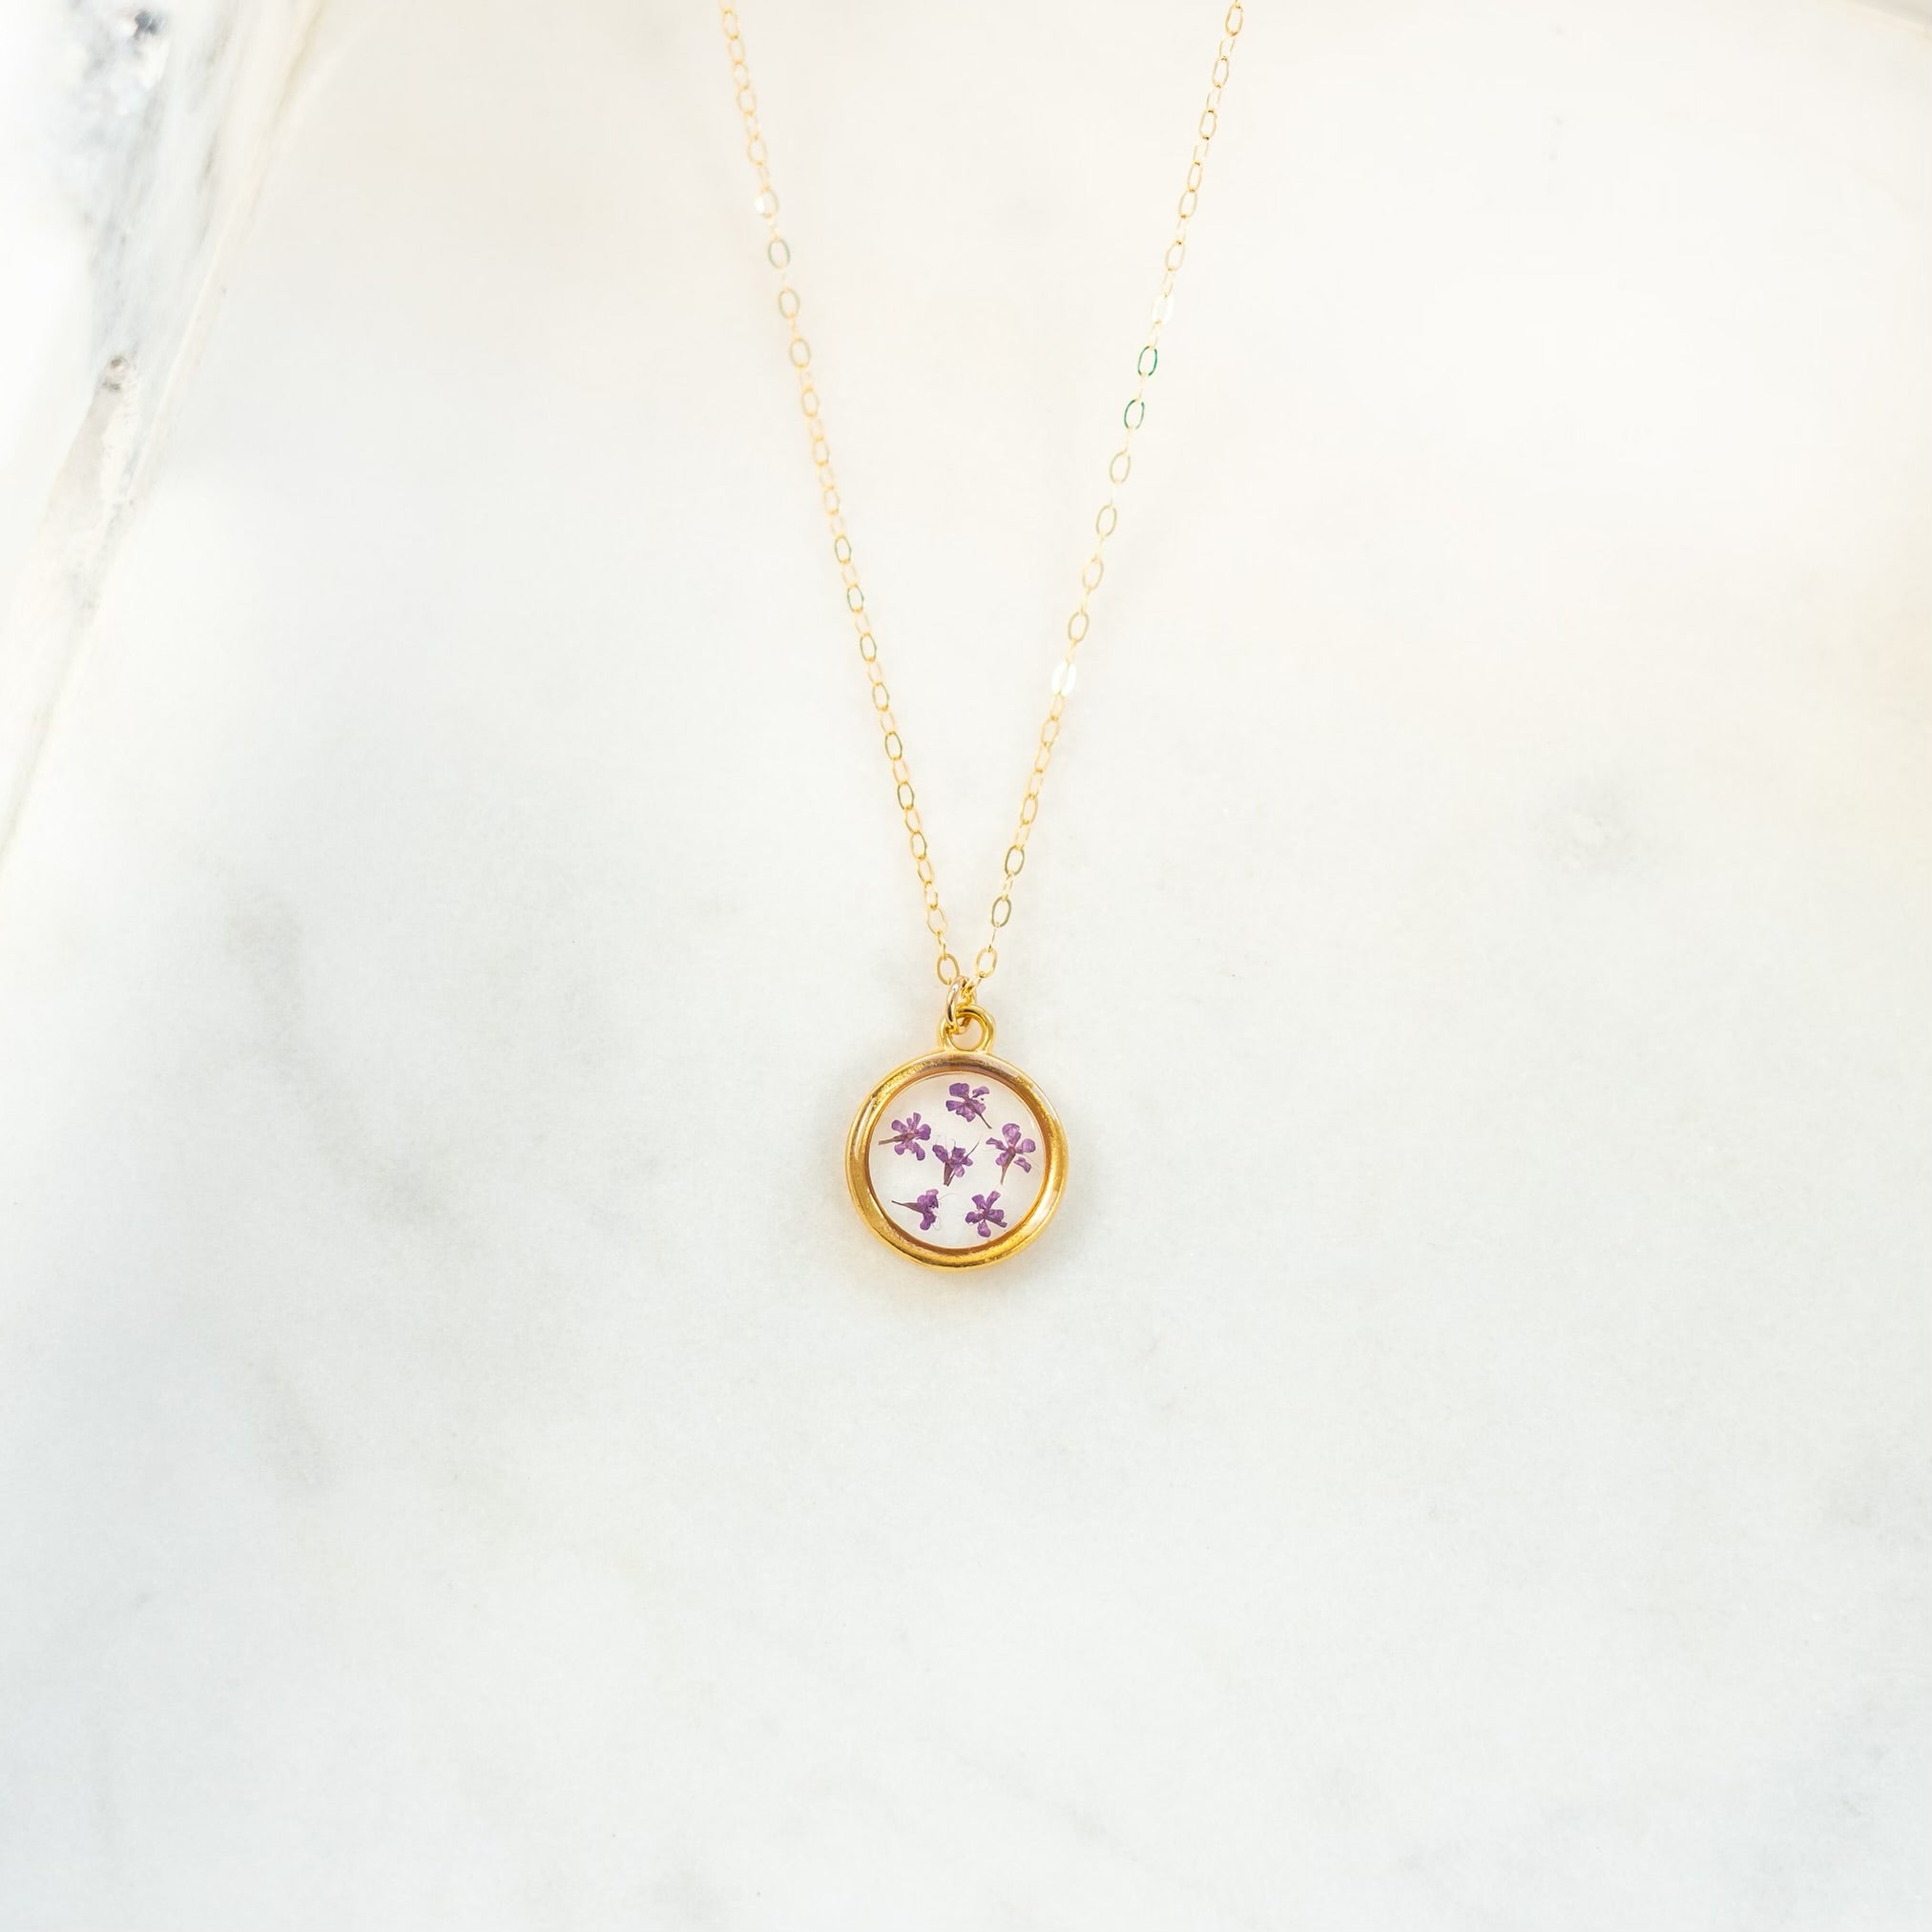 Enamel Monogram Charm Necklace Turquoise / Yellow Gold / Mini Pendant on 16 Enhancer Chain (Shown in 2nd Image)